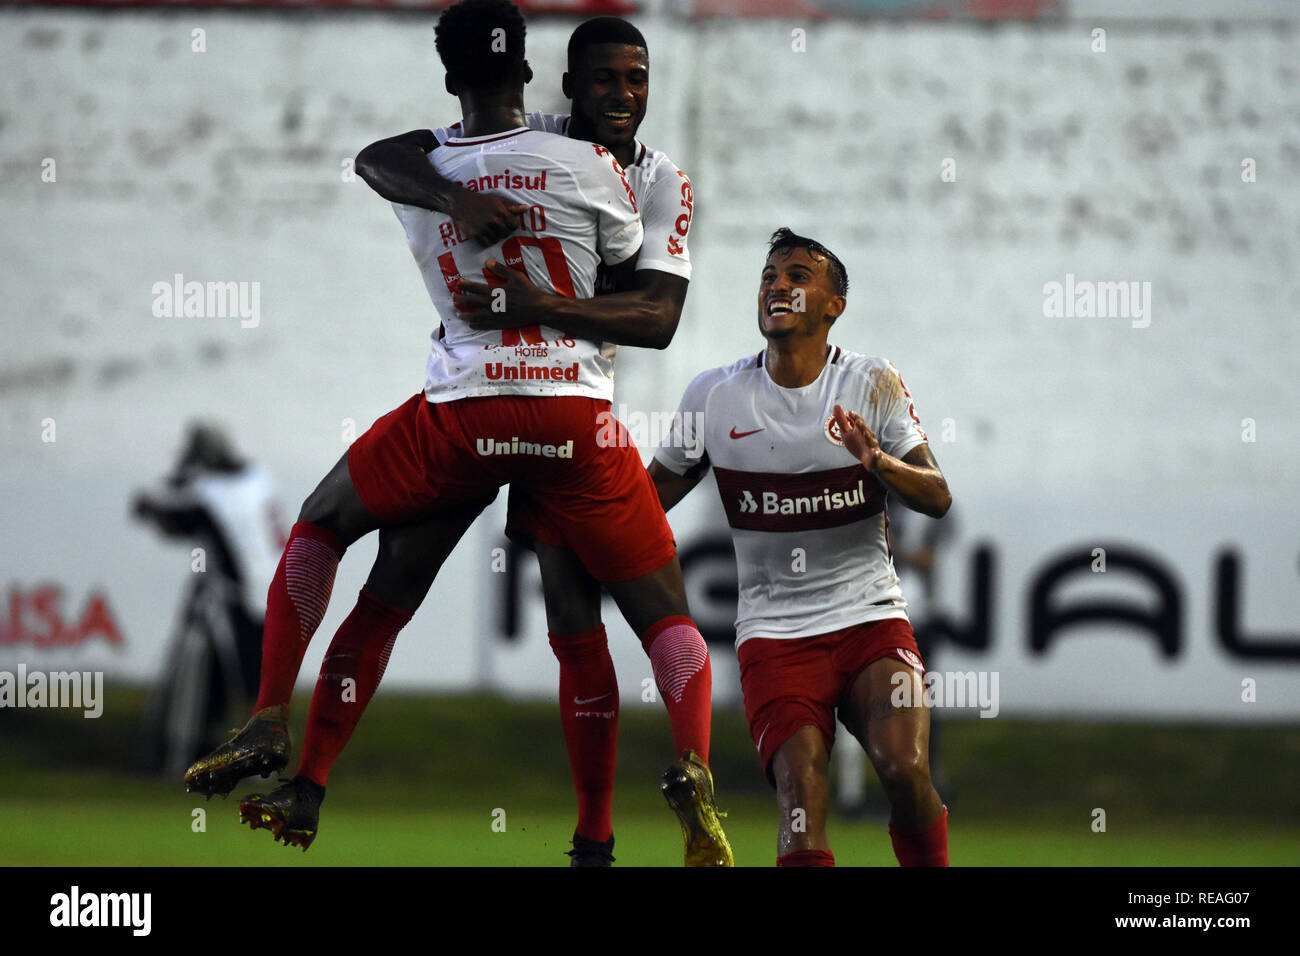 RS - IJU - 20/01/2019 - GAUCH O 2019, S o Luiz x Internacional - Emerson Santos player of Inter celebrates his goal with players of his team during match against S o Luiz in the stadium October 19 by the State Championship 2019 Photo: Renato Padilha / AGIF Stock Photo